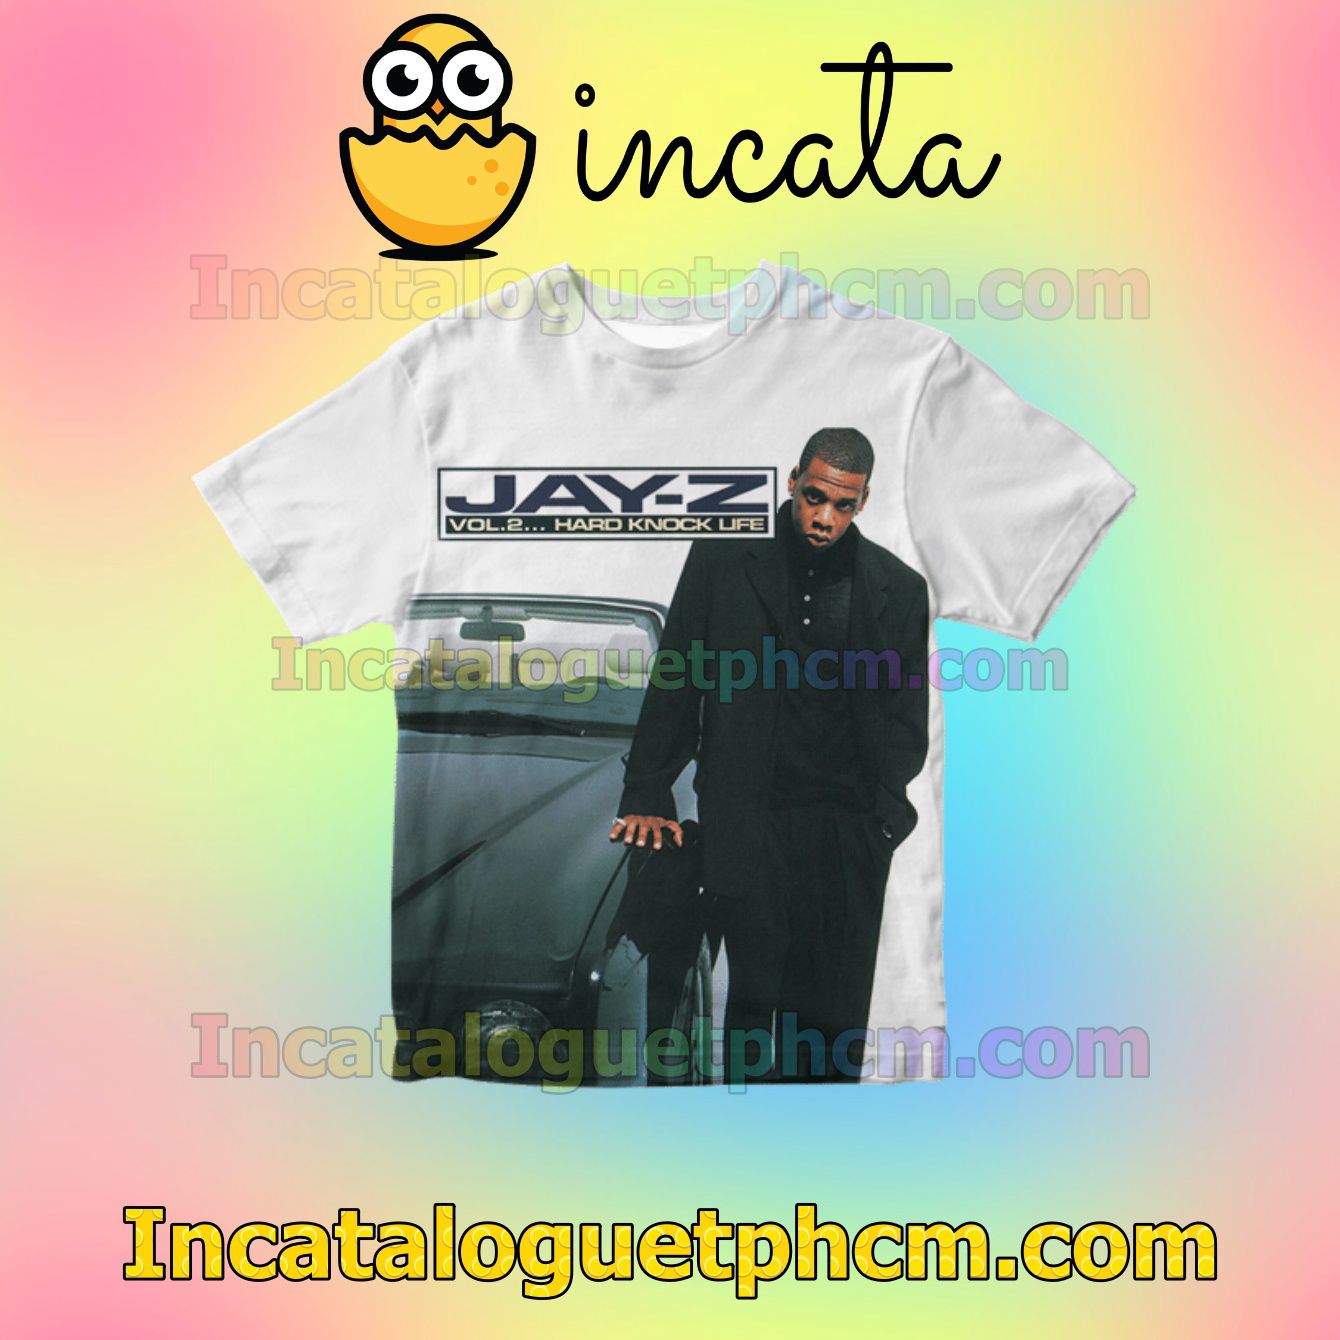 Jay-z Vol. 2 Hard Knock Life Album Cover Personalized Shirt